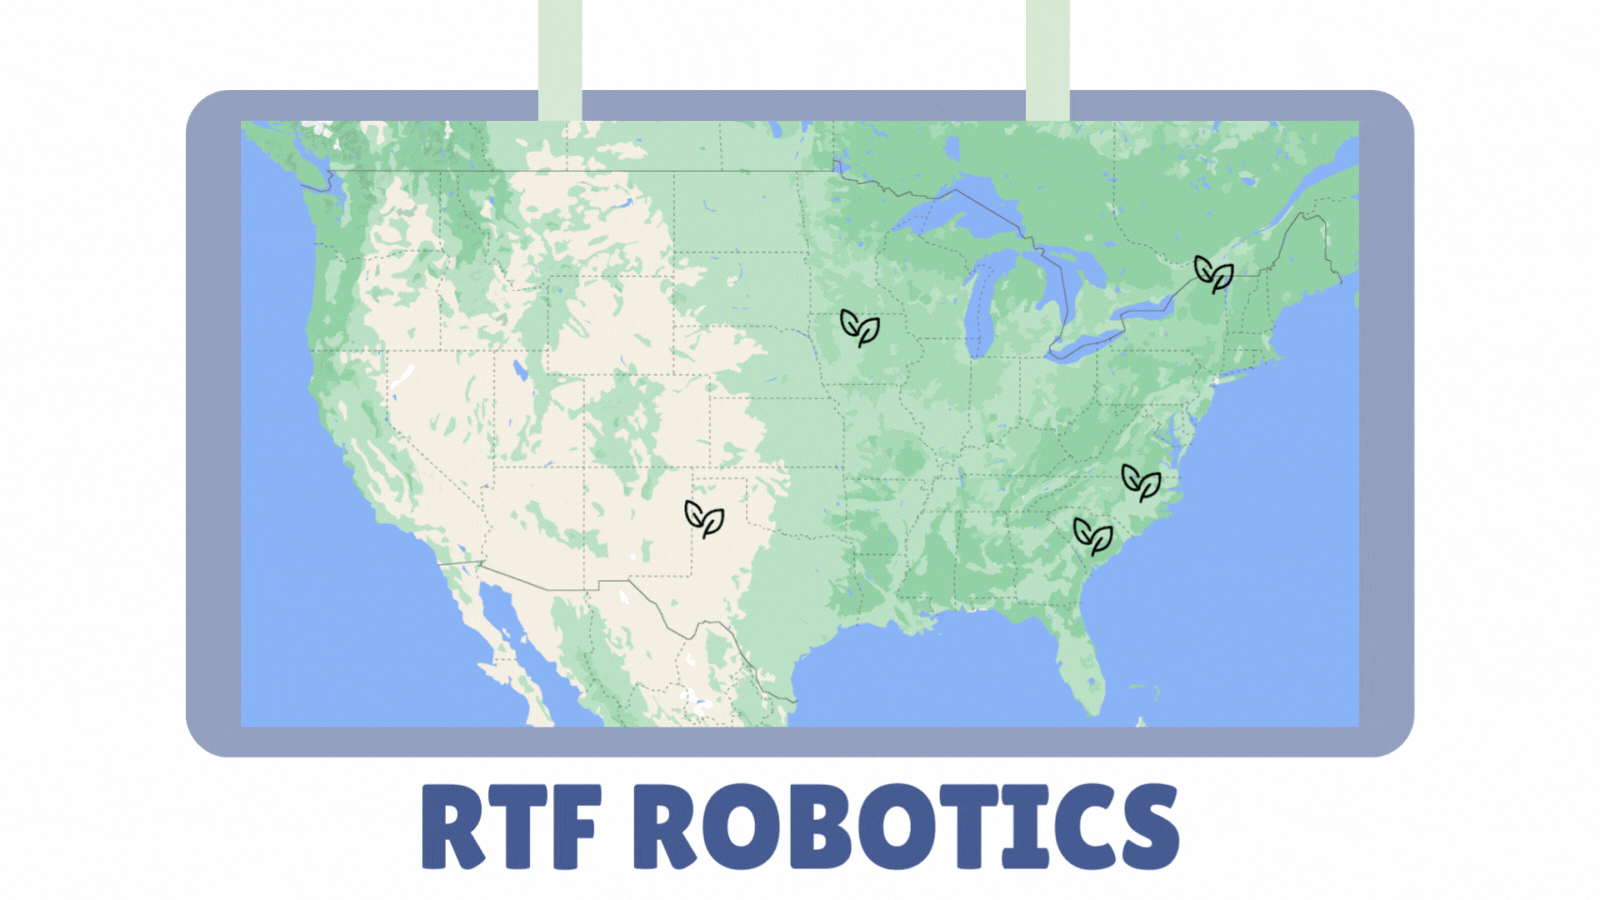 A map shows five leaf pinpoints, which are in Walterboro, SC, Lake Placid, NY, Whitharral, TX, Gilbert, IA, and Goldsboro, NC. It reads "RTF Robotics."